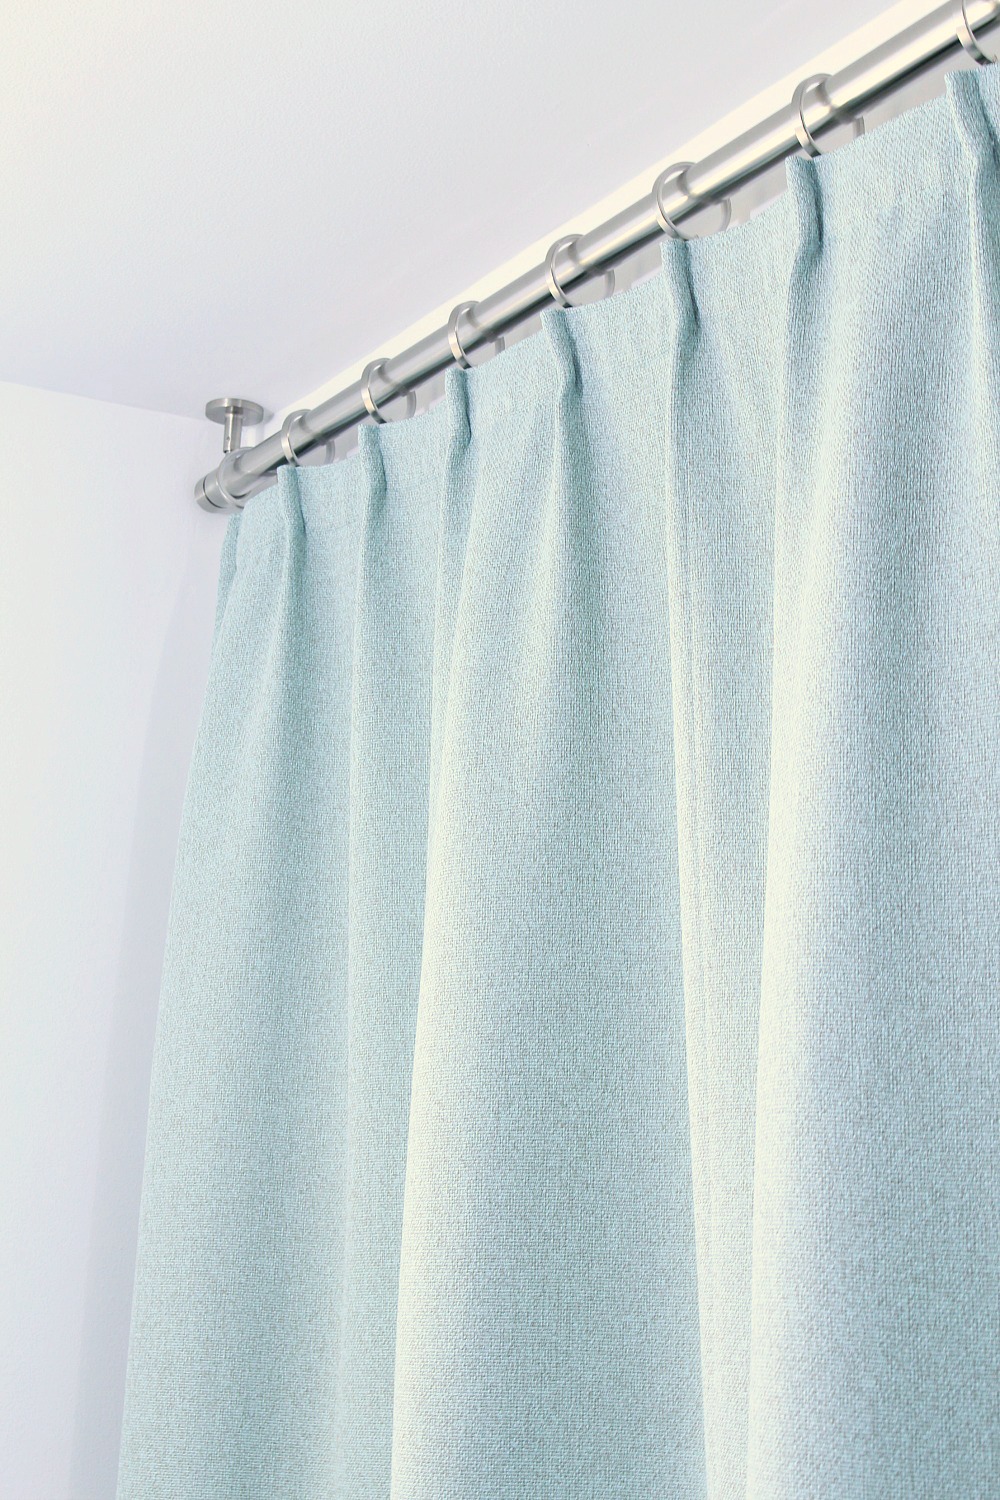 Bathroom Update Ceiling Mounted Shower Curtain Rod